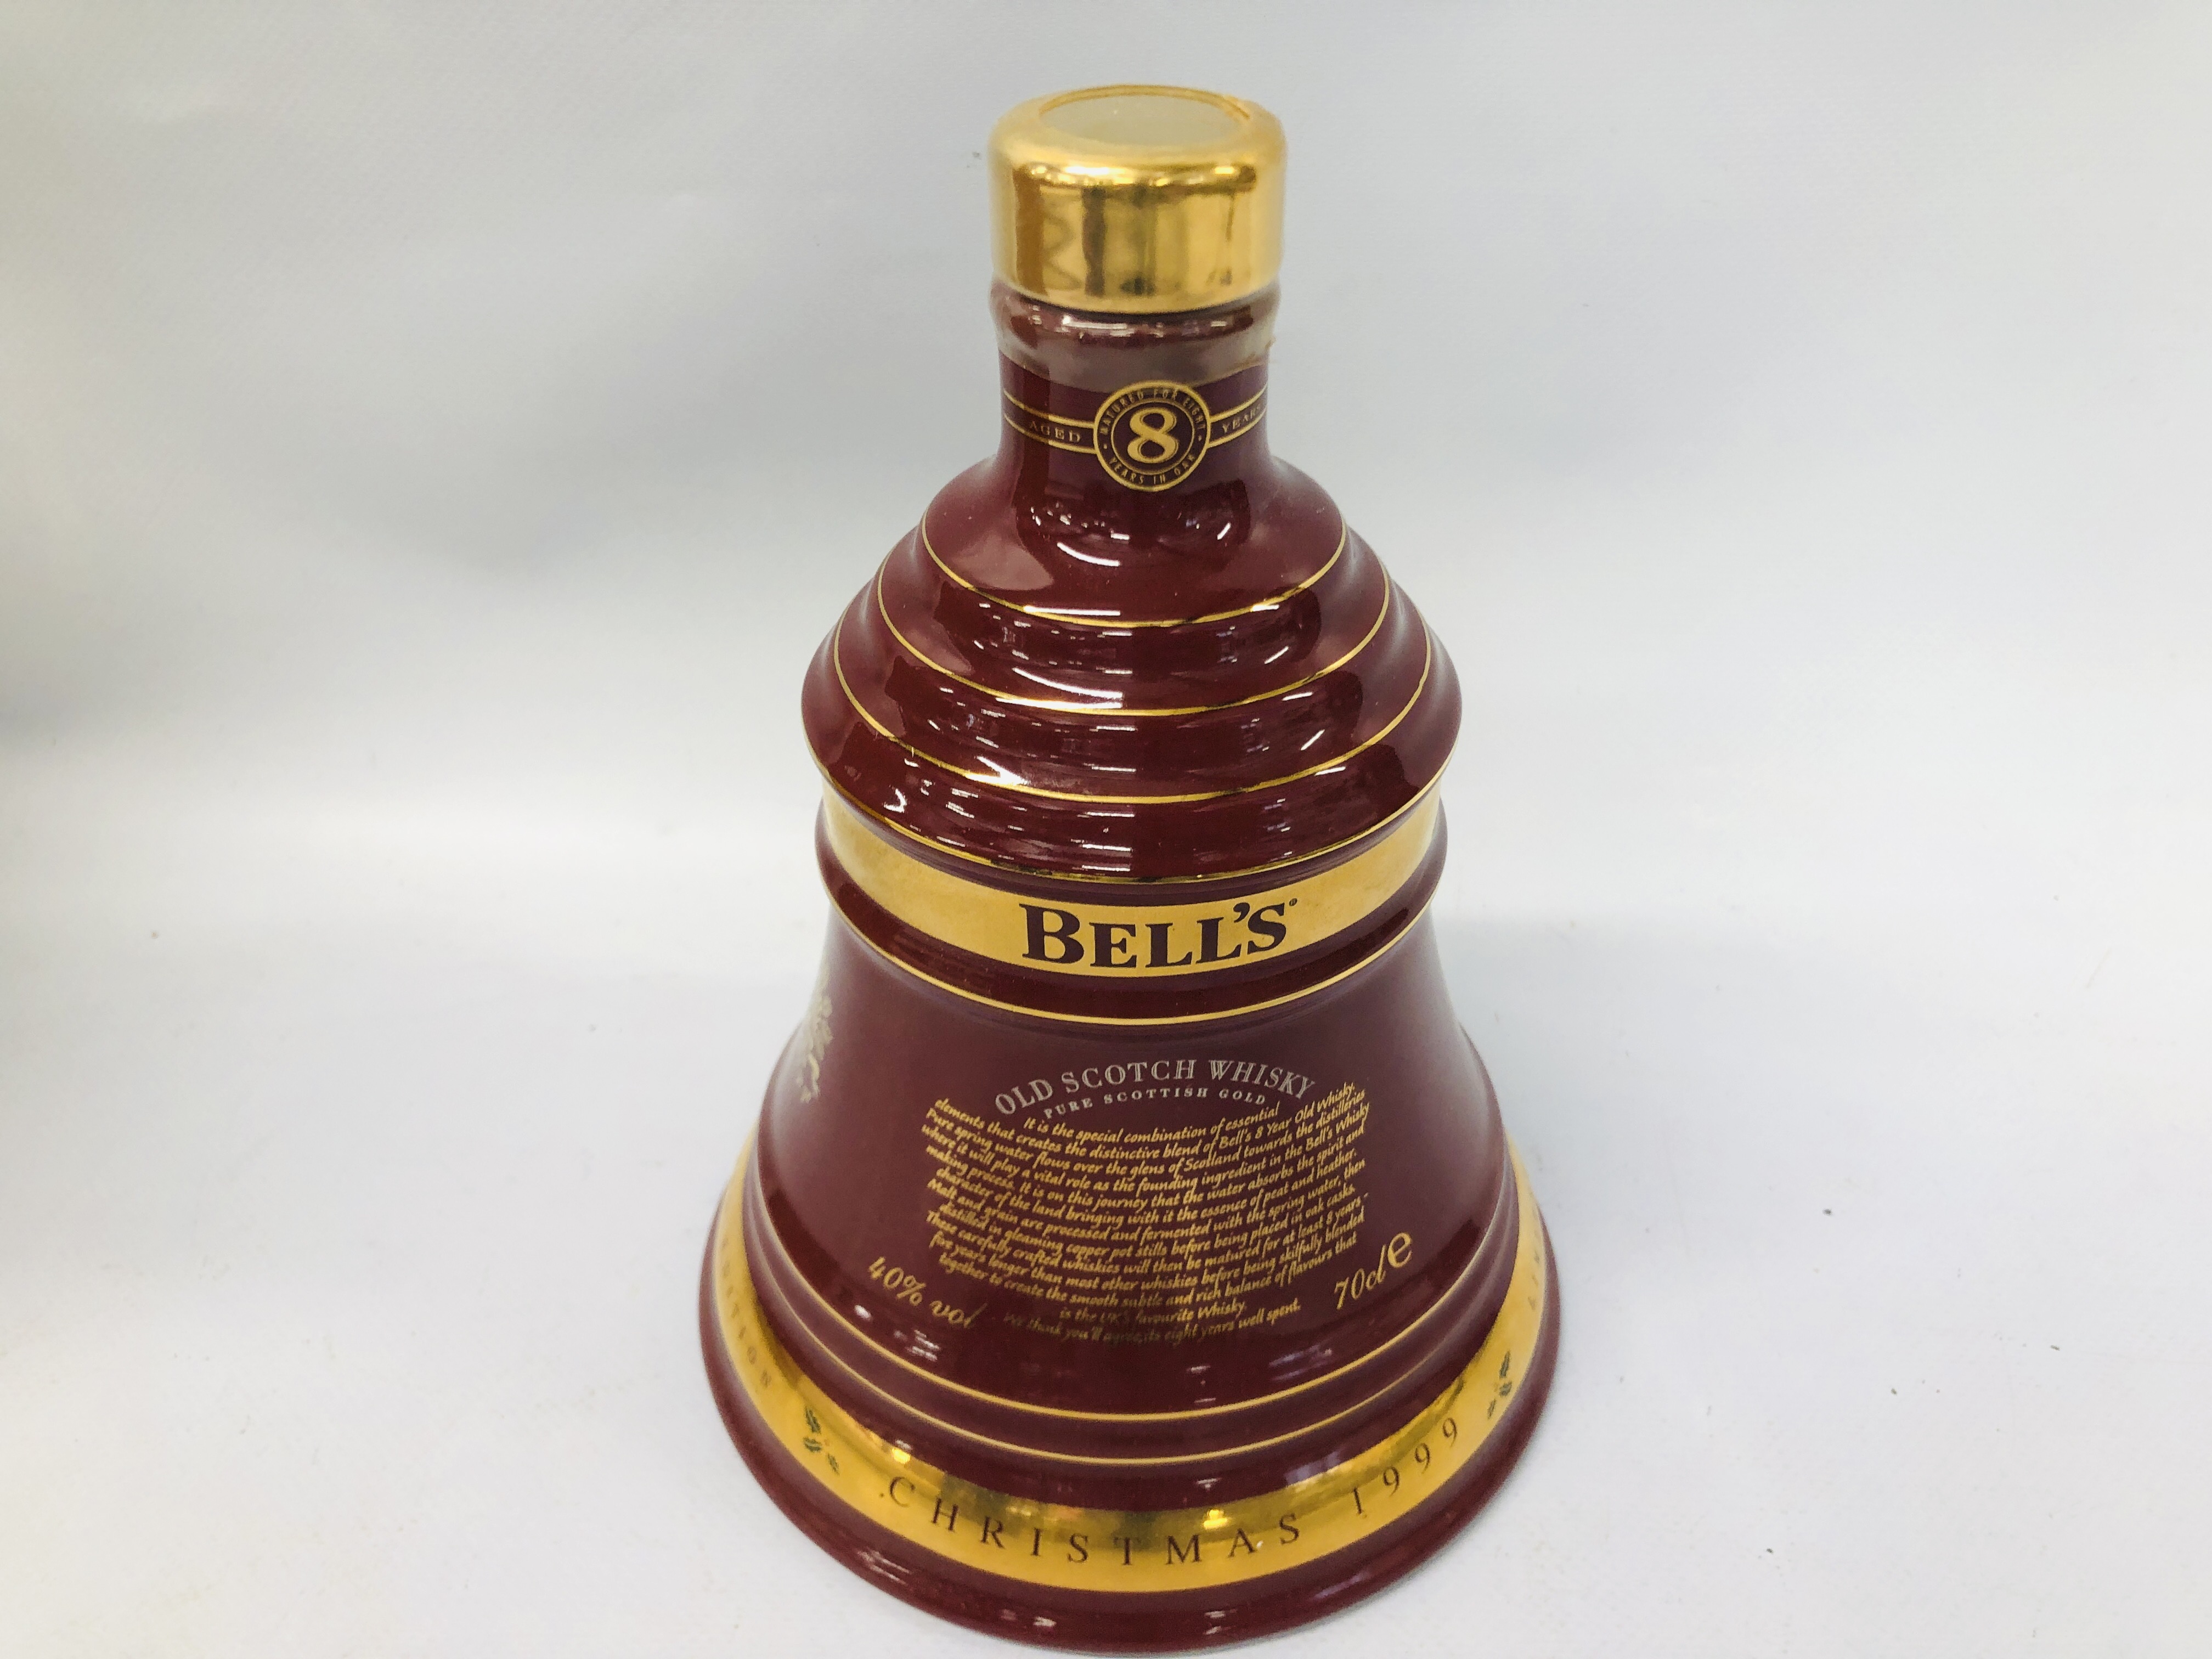 BELLS OLD SCOTCH WHISKY L EDITION CHRISTMAS 1999 DECANTER 70CL (BOXED) - Image 3 of 4